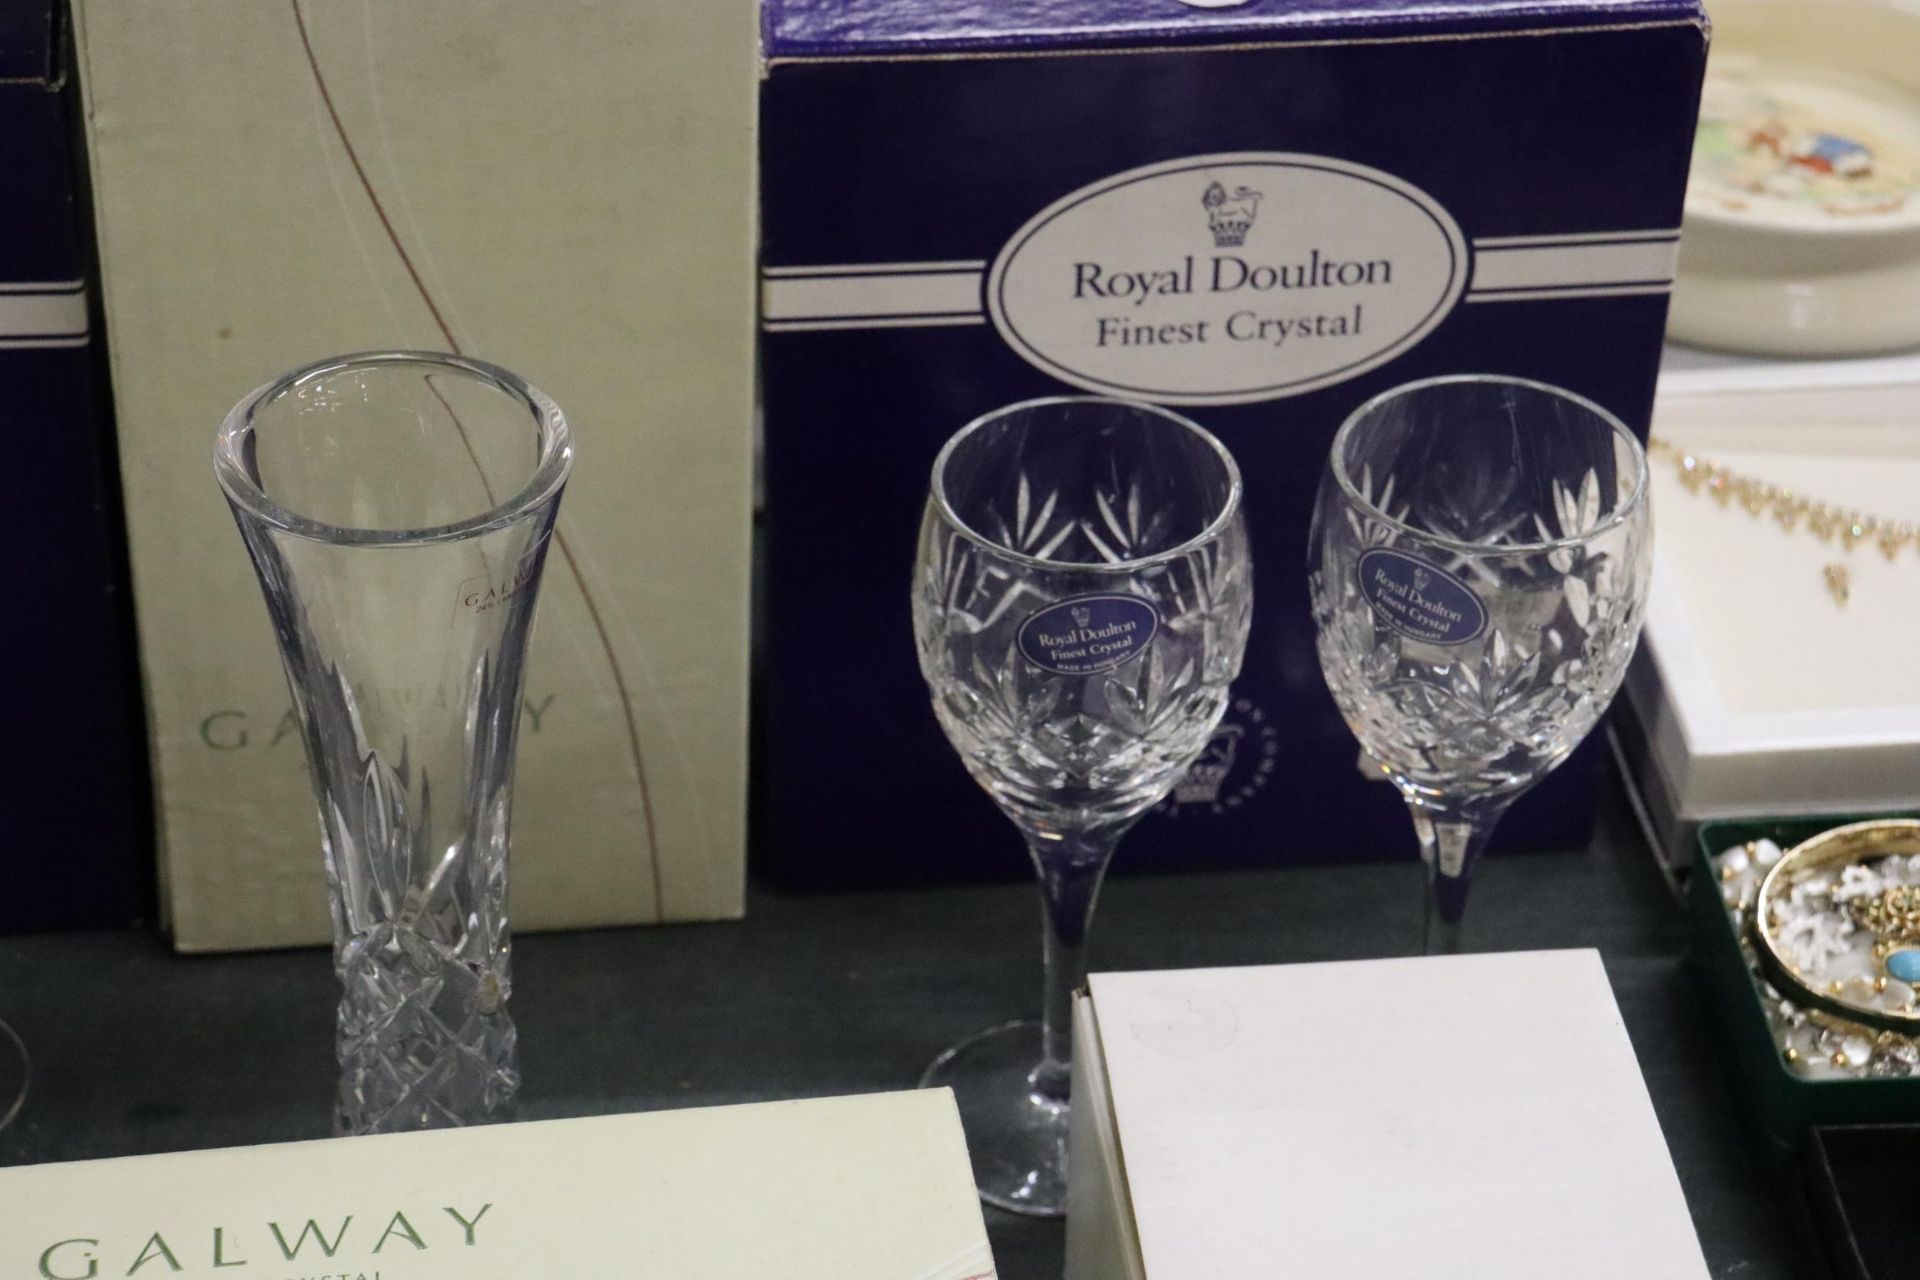 A COLLECTION OF BOXED GLASSWARE TO INCLUDE ROYAL DOULTON CRYSTAL GLASSES, ROYAL DOULTON WHISKY - Image 5 of 8